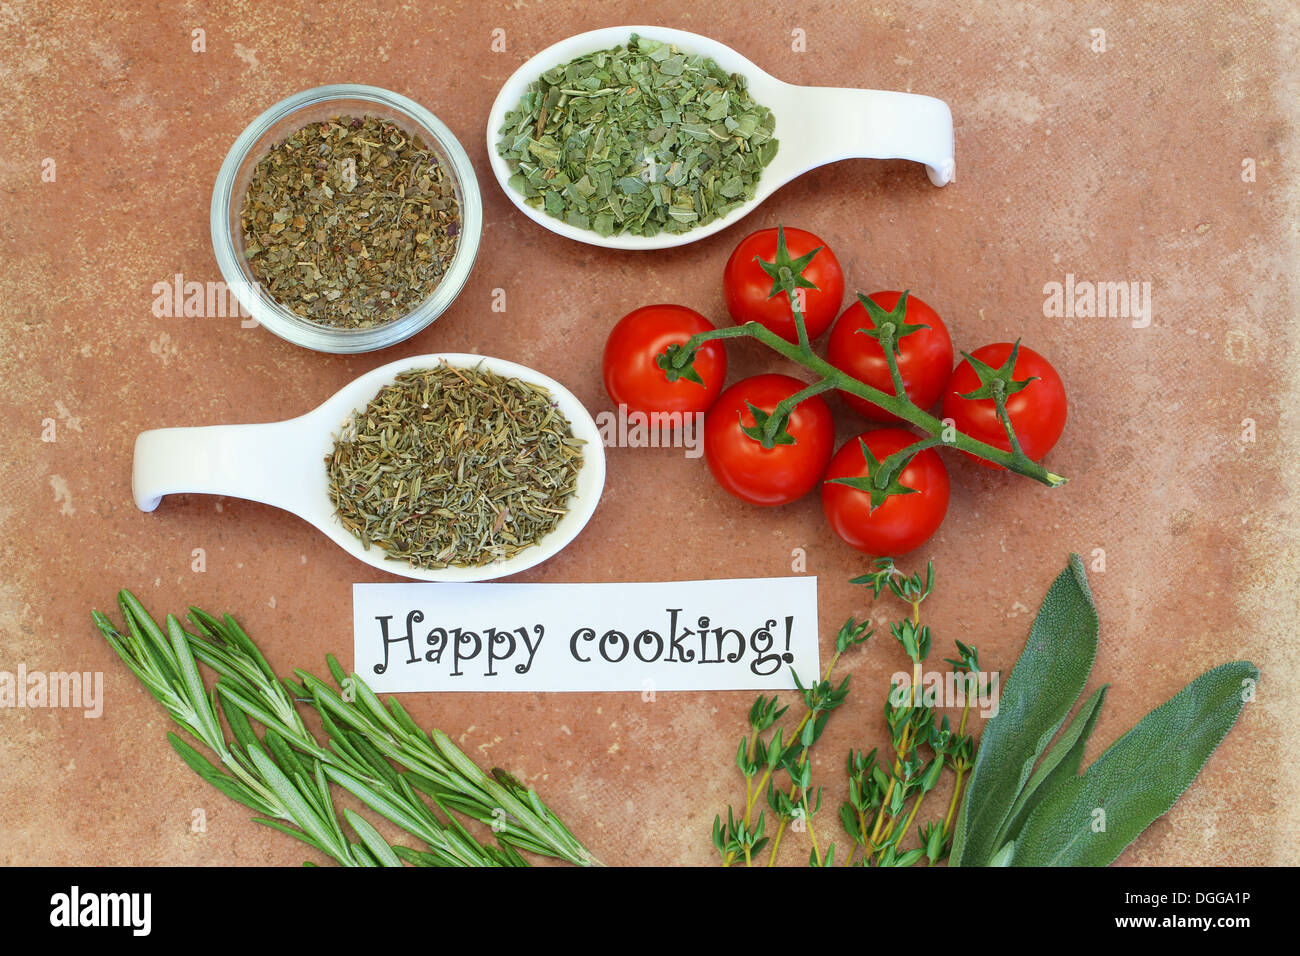 Happy cooking card with cherry tomatoes, fresh and dried herbs on terracotta surface Stock Photo